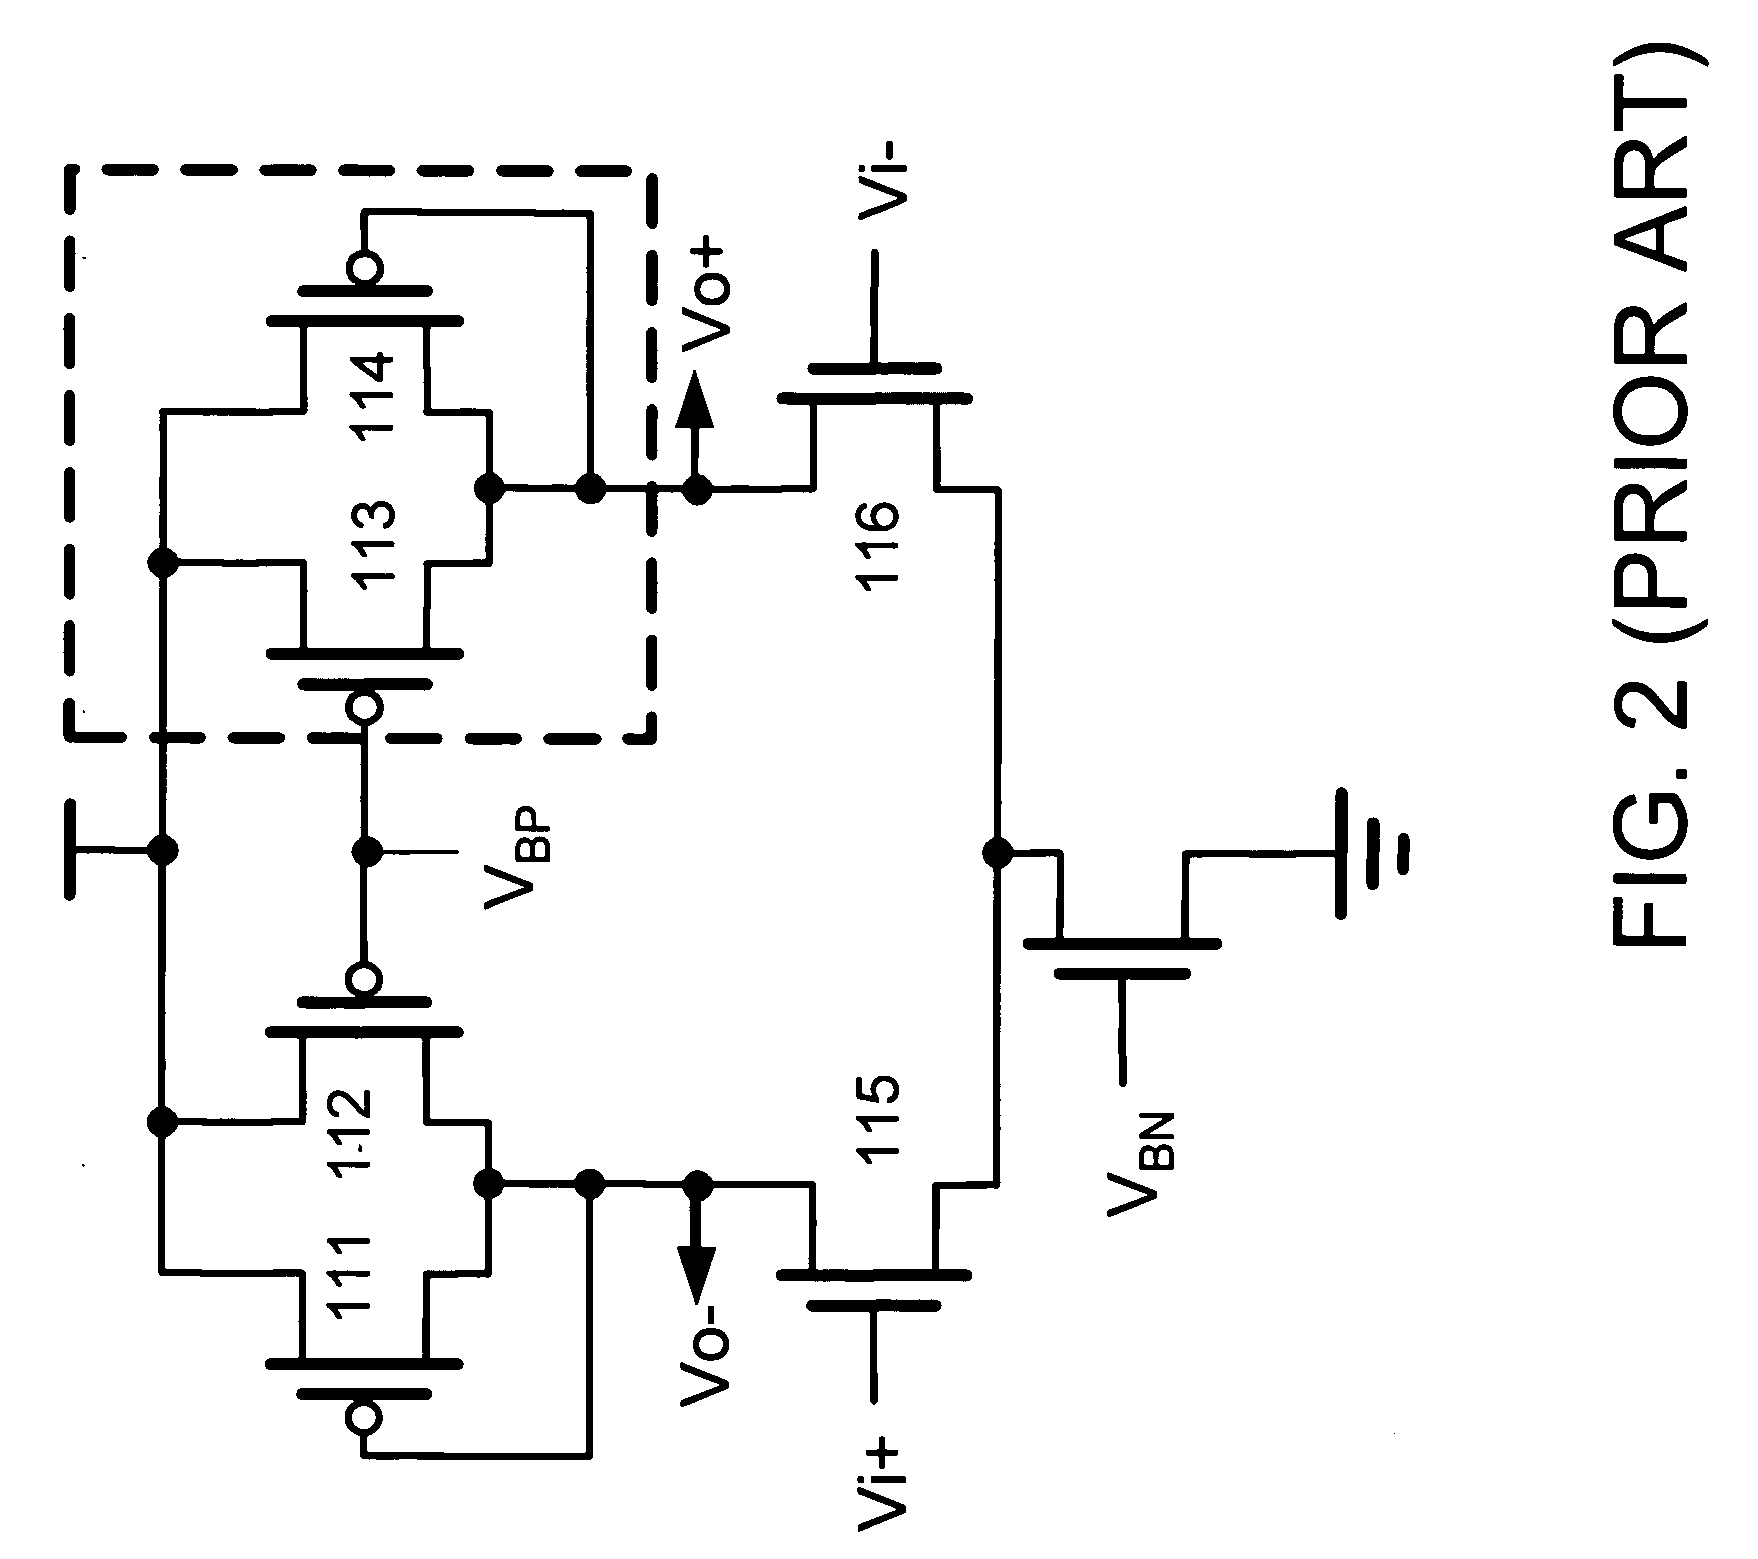 DLL-based programmable clock generator using a threshold-trigger delay element circuit and a circular edge combiner